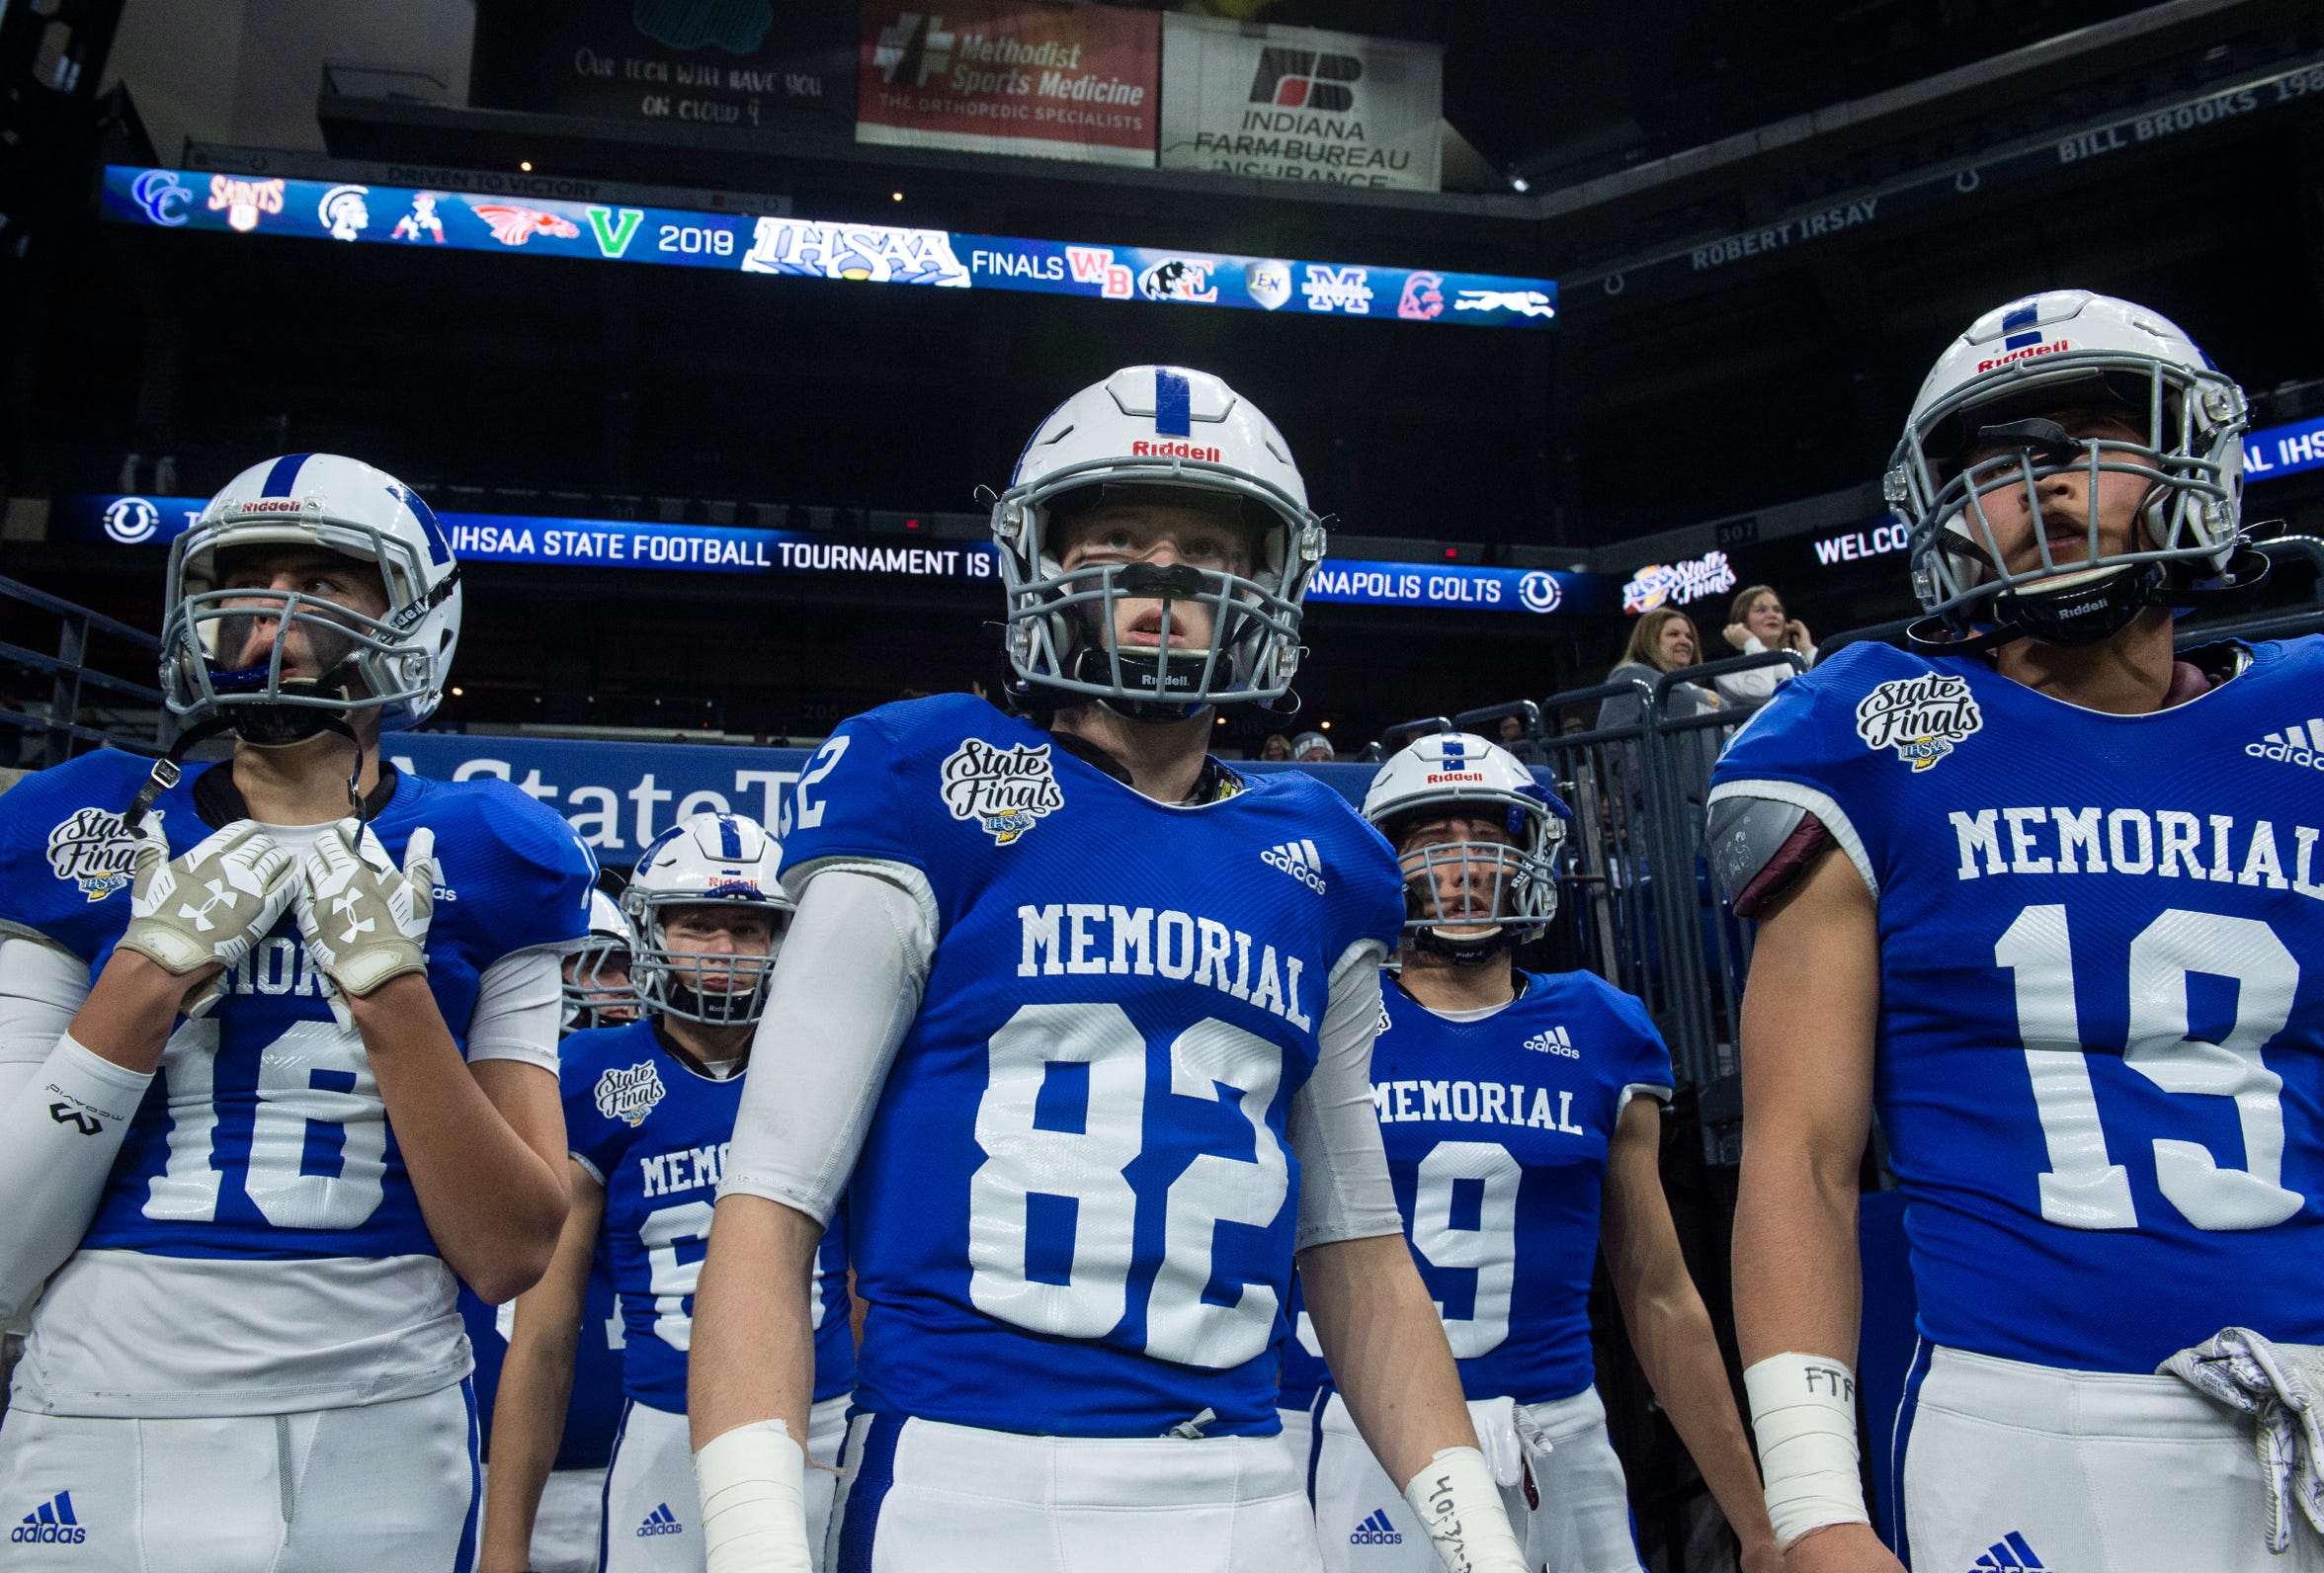 Memorial walks onto the field before the Evansville Memorial vs East Noble IHSAA Class 4A State Championship game at Lucas Oil Stadium in Indianapolis, Ind., Saturday, Nov. 30, 2019. Memorial won the state title in a 21-3 victory over East Noble.